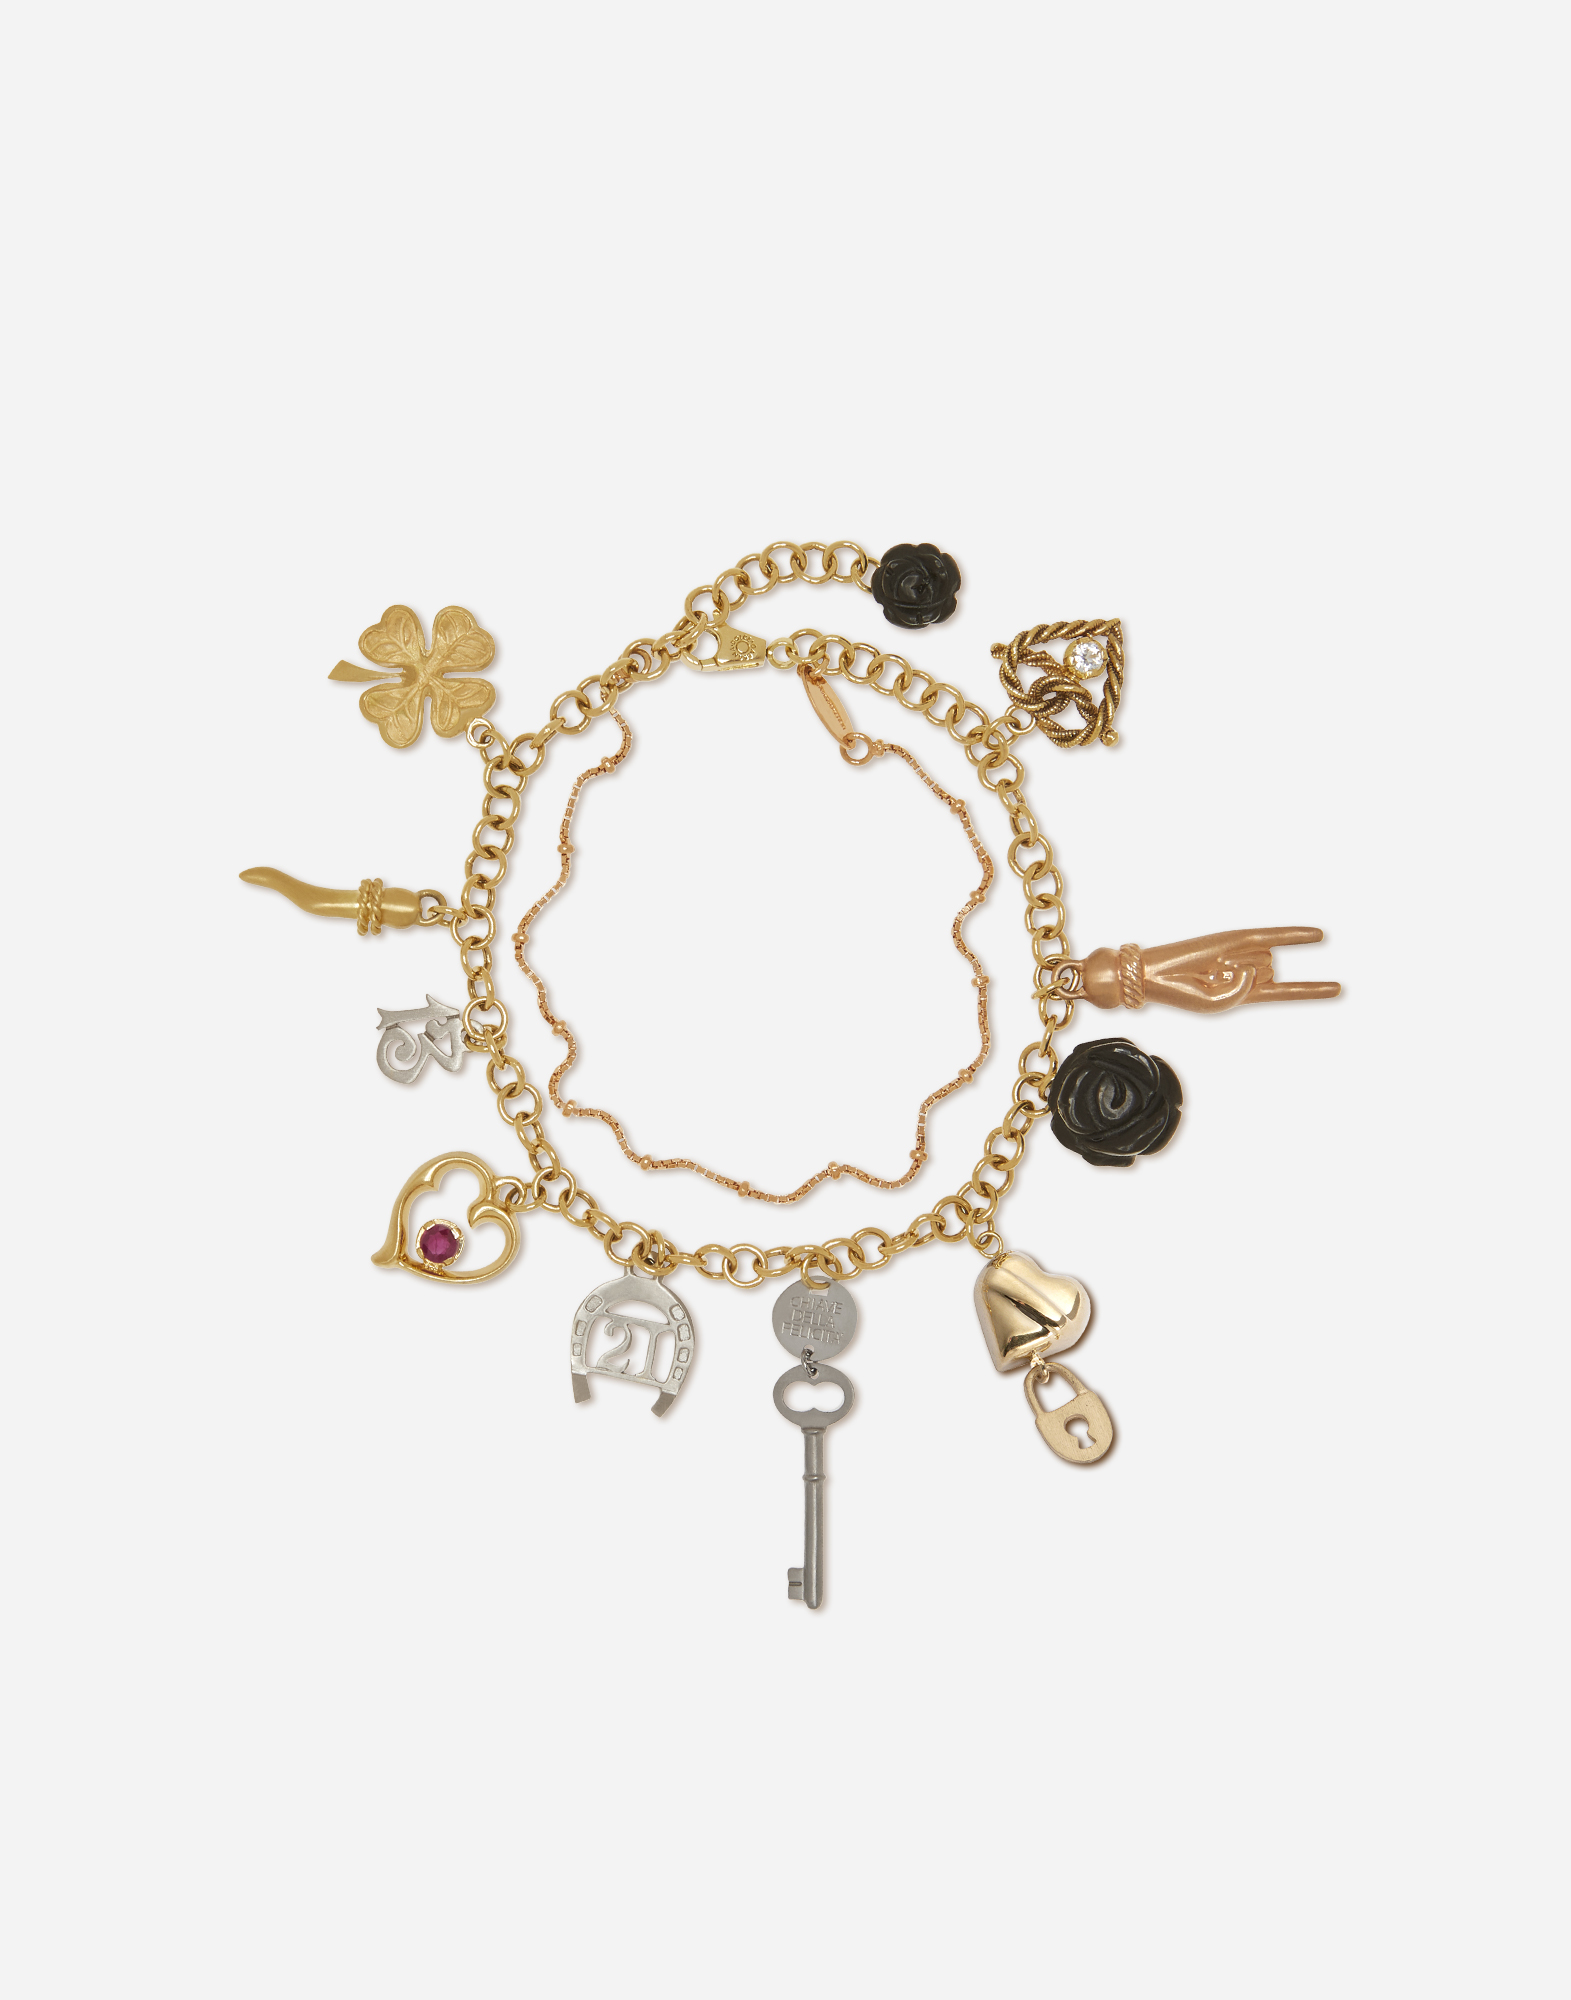 Dolce & Gabbana Family Bracelet In Yellow, White And Red Gold With Black Jades And Ruby